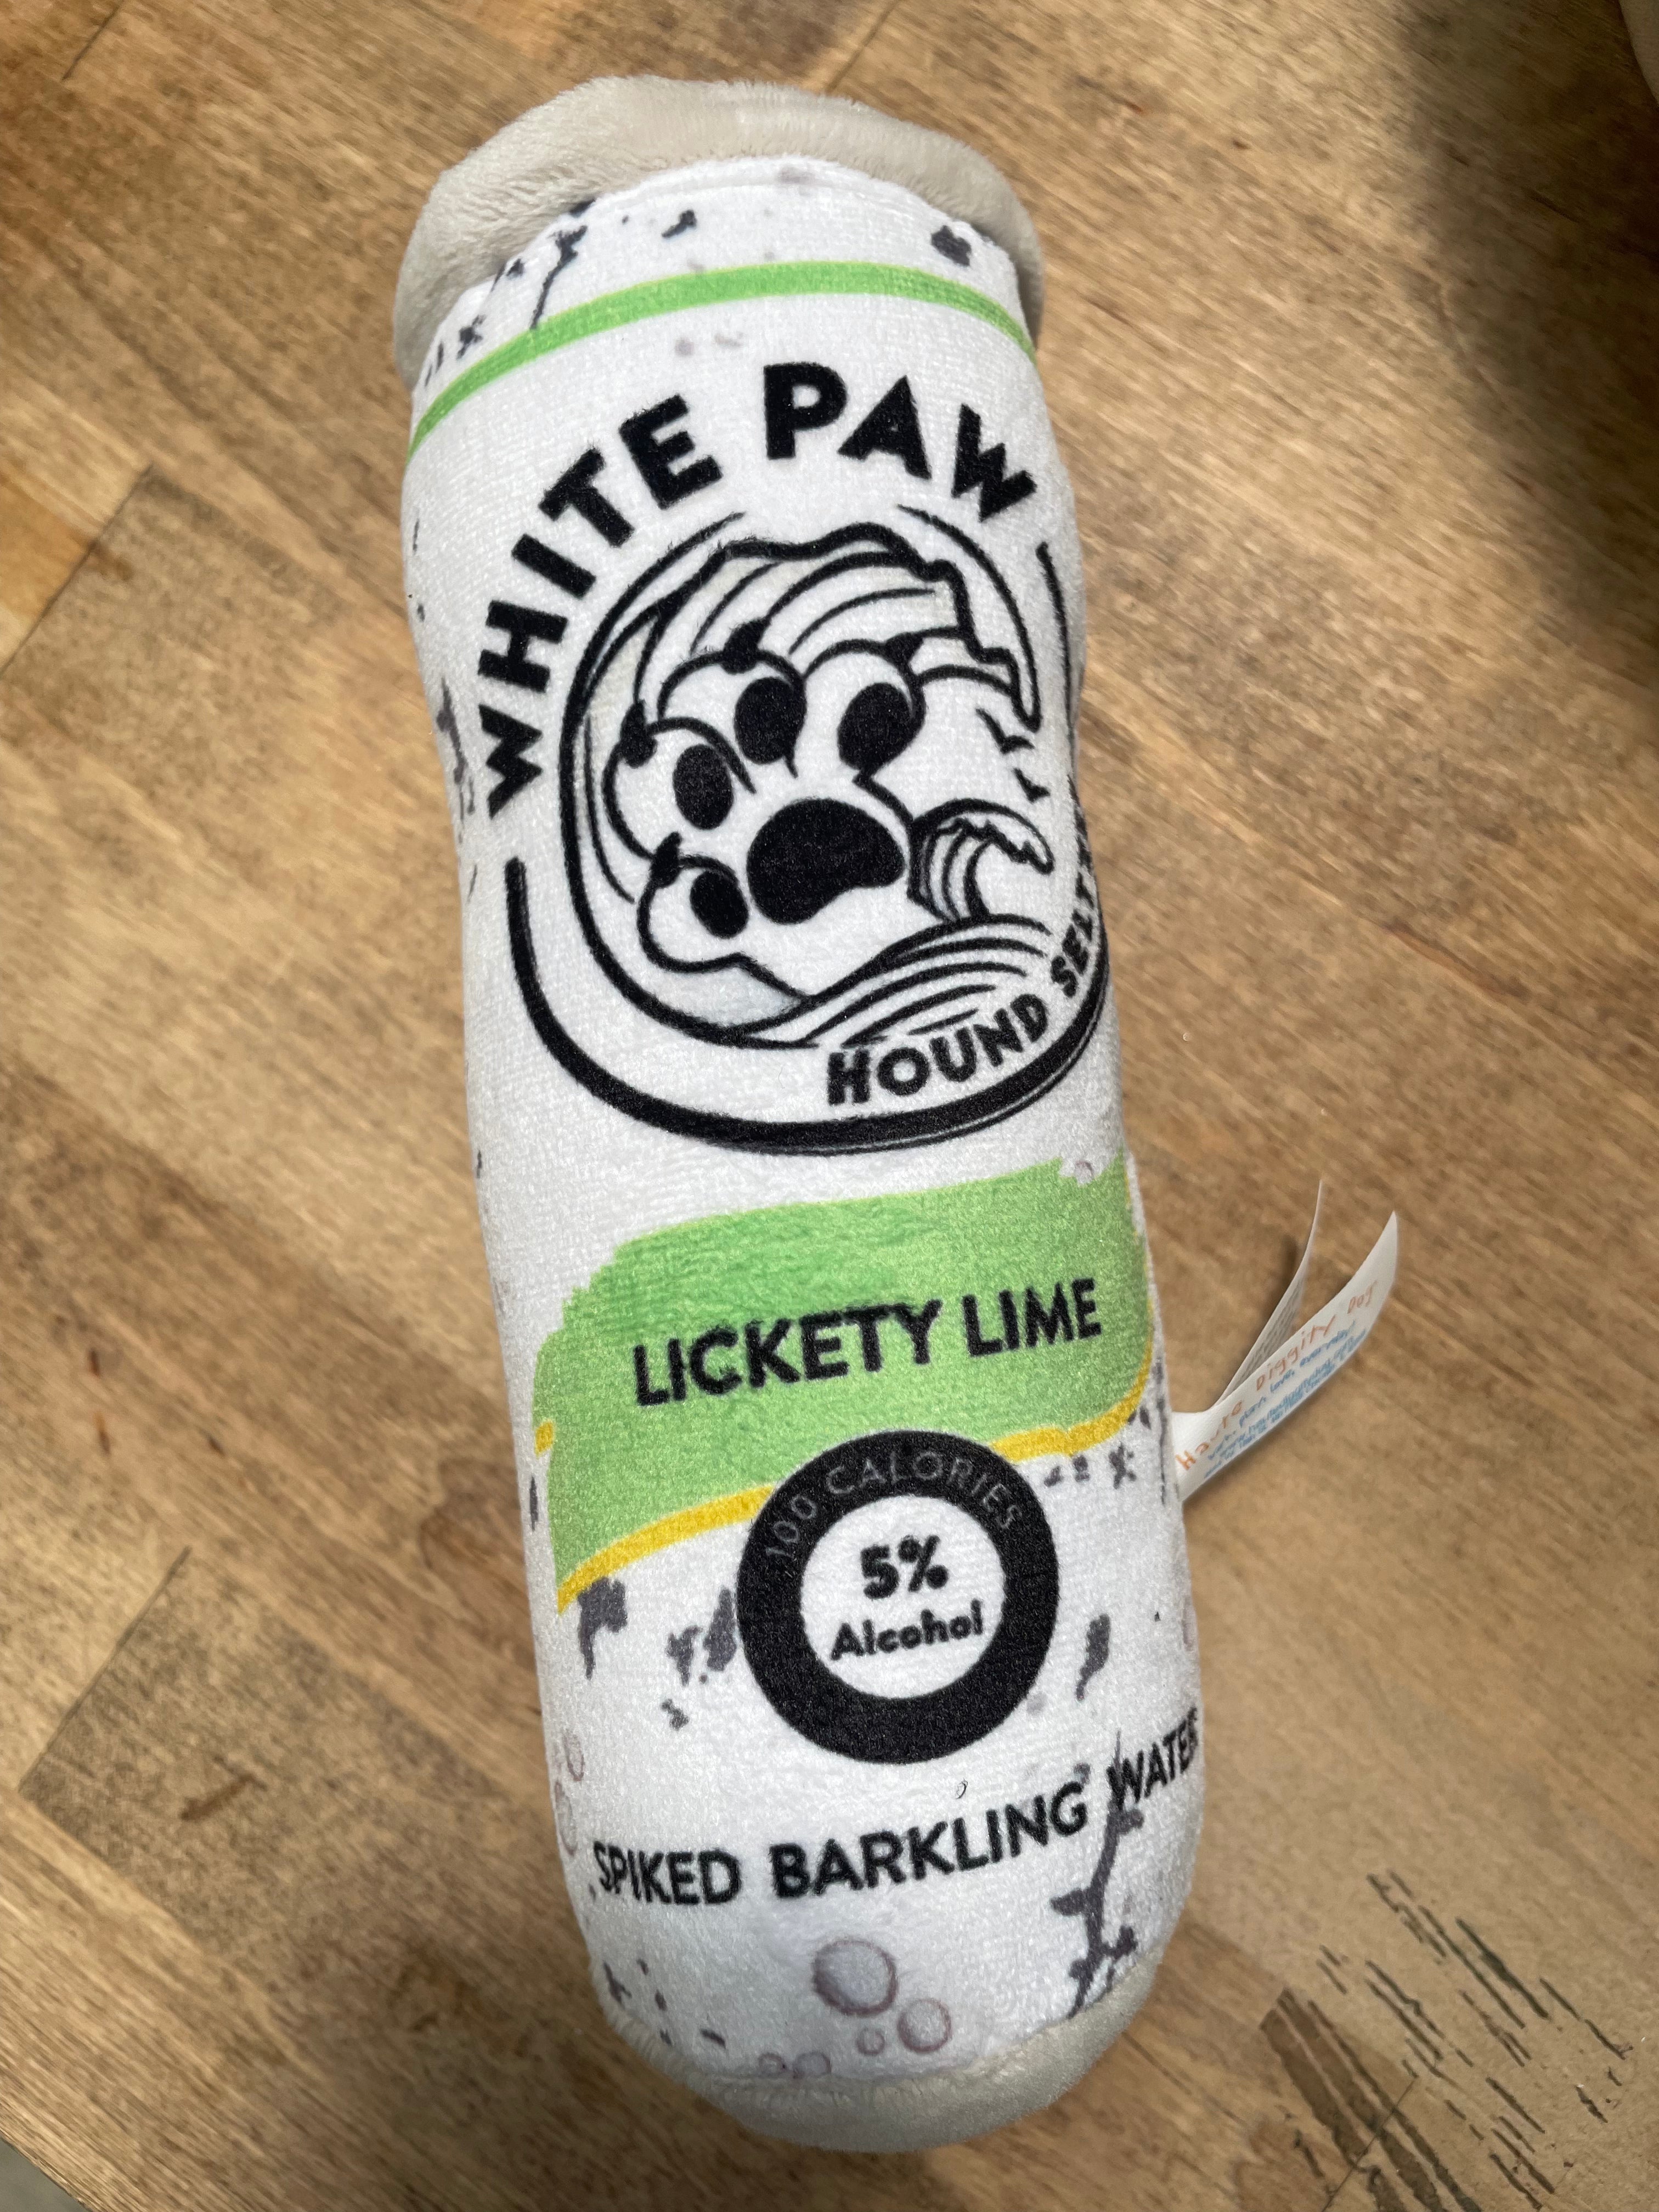 Drink Themed Dog Toys